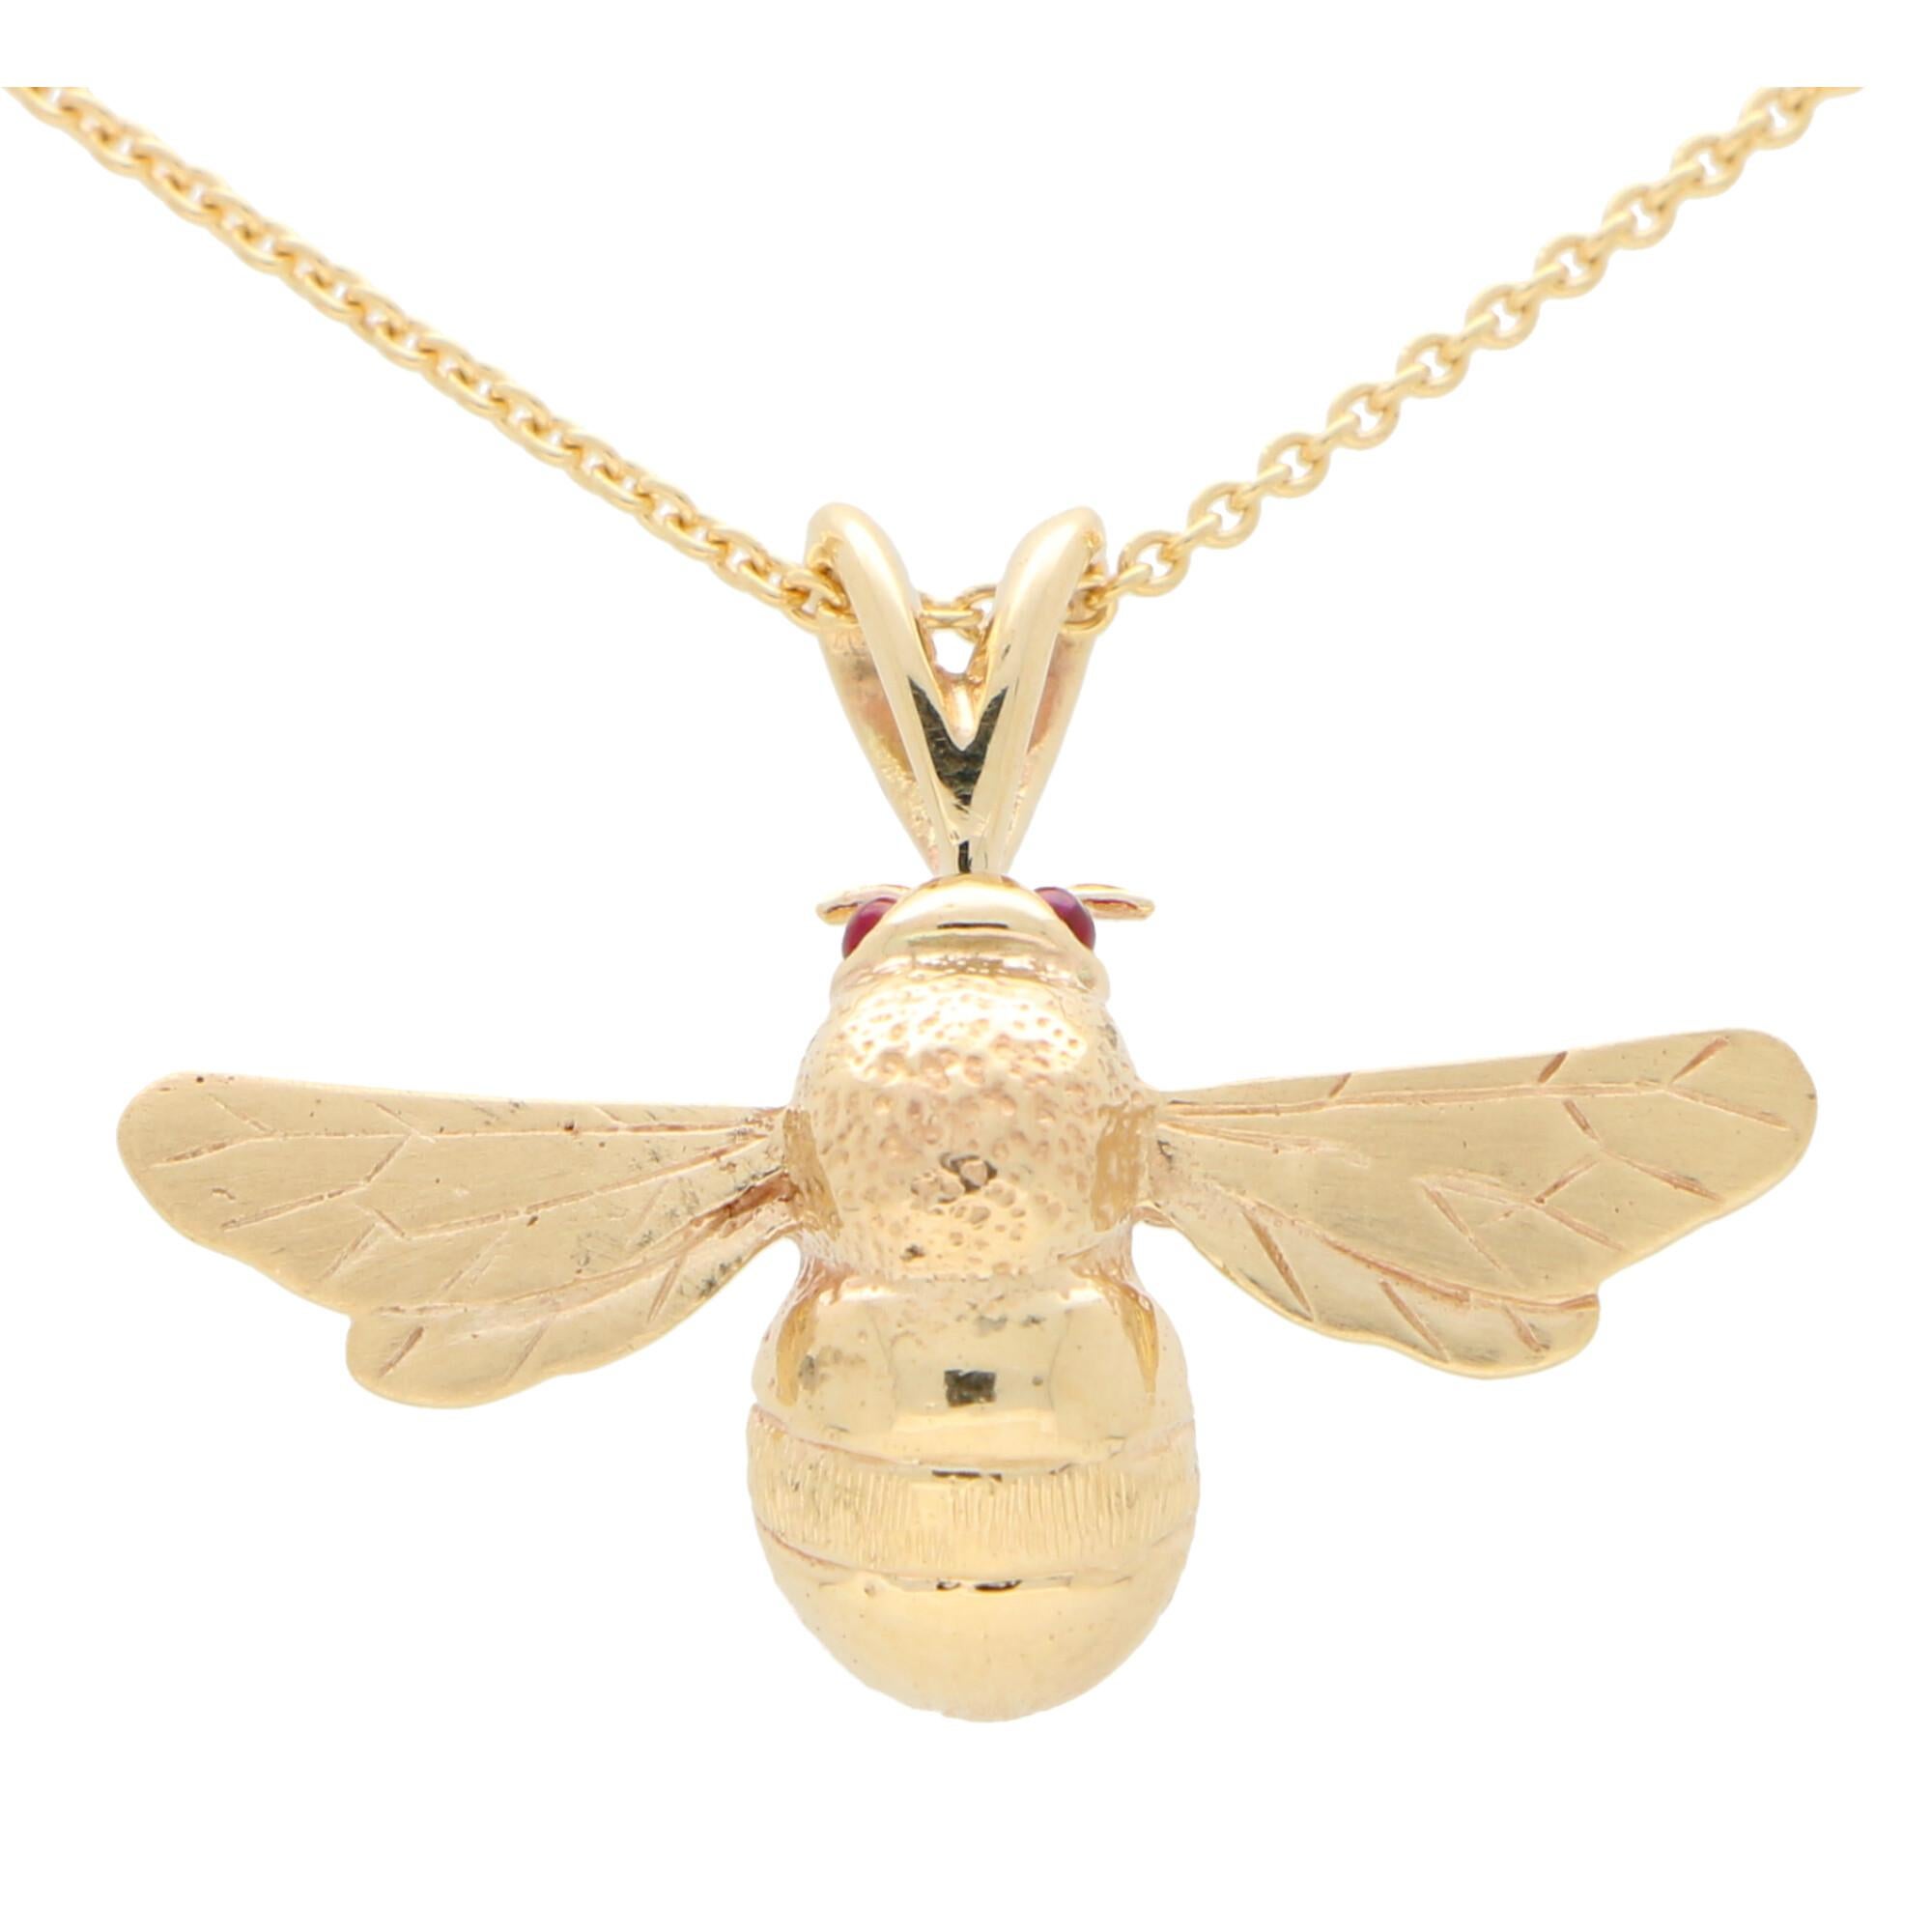 Ruby Eyed Bumble Bee Pendant Necklace Set in 9 Karat Yellow Gold For Sale